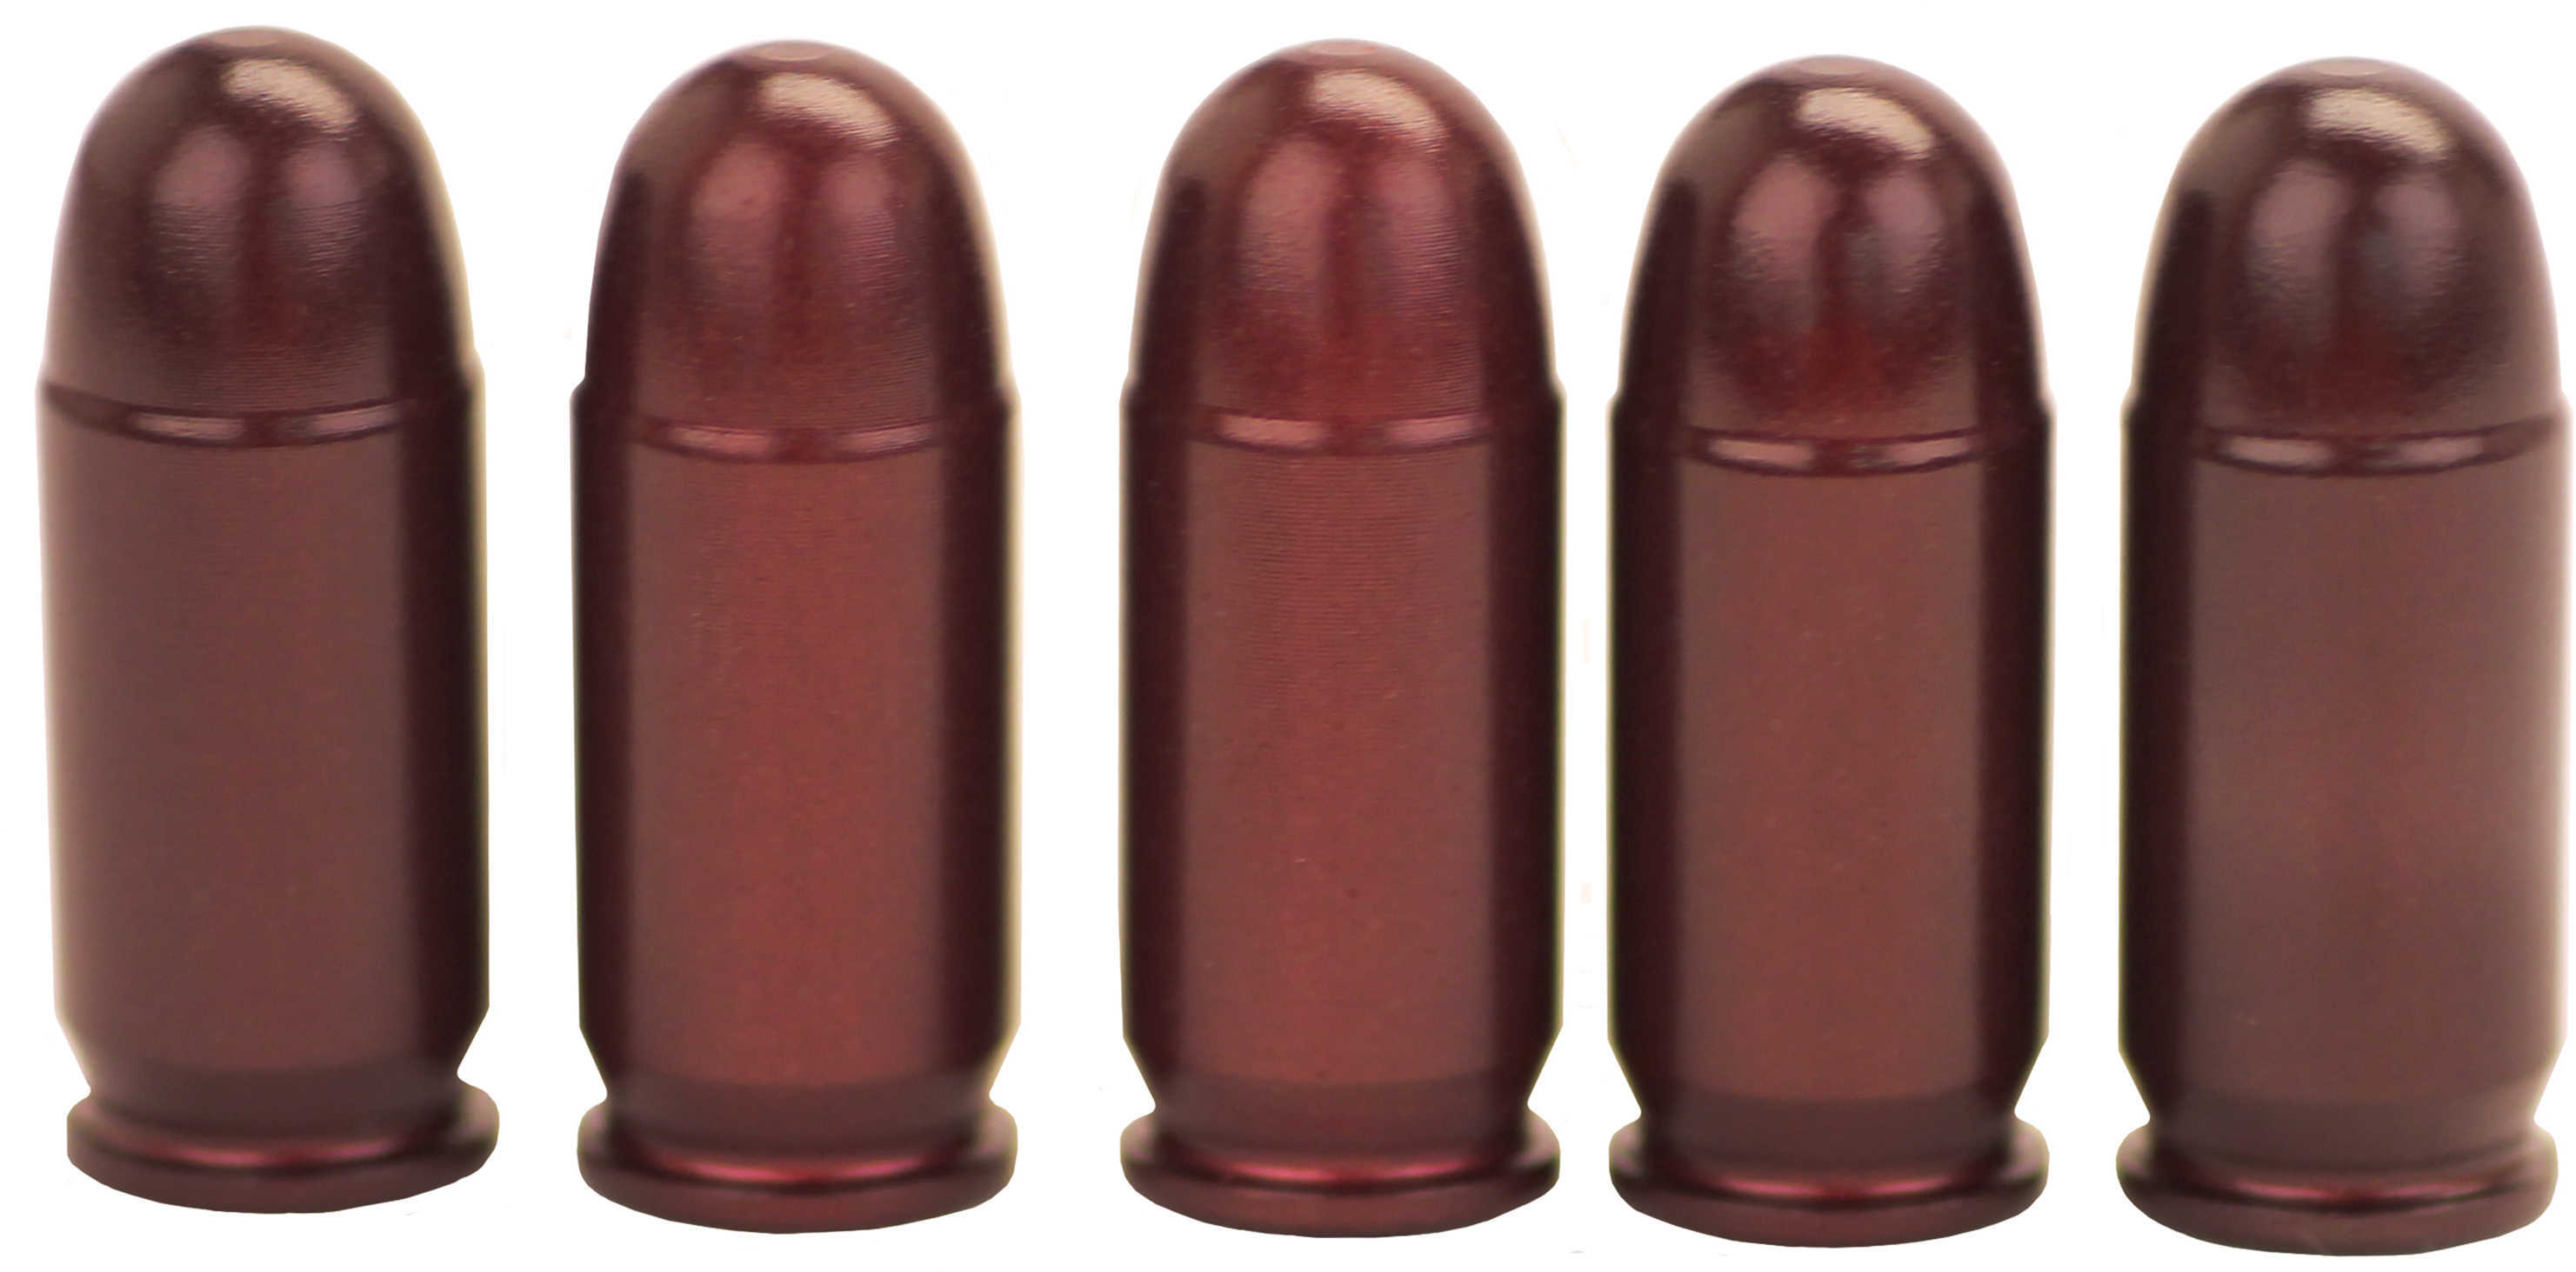 A-Zoom Pachmayr Pistol Metal Snap Caps 380 Auto (Per 5) 15113